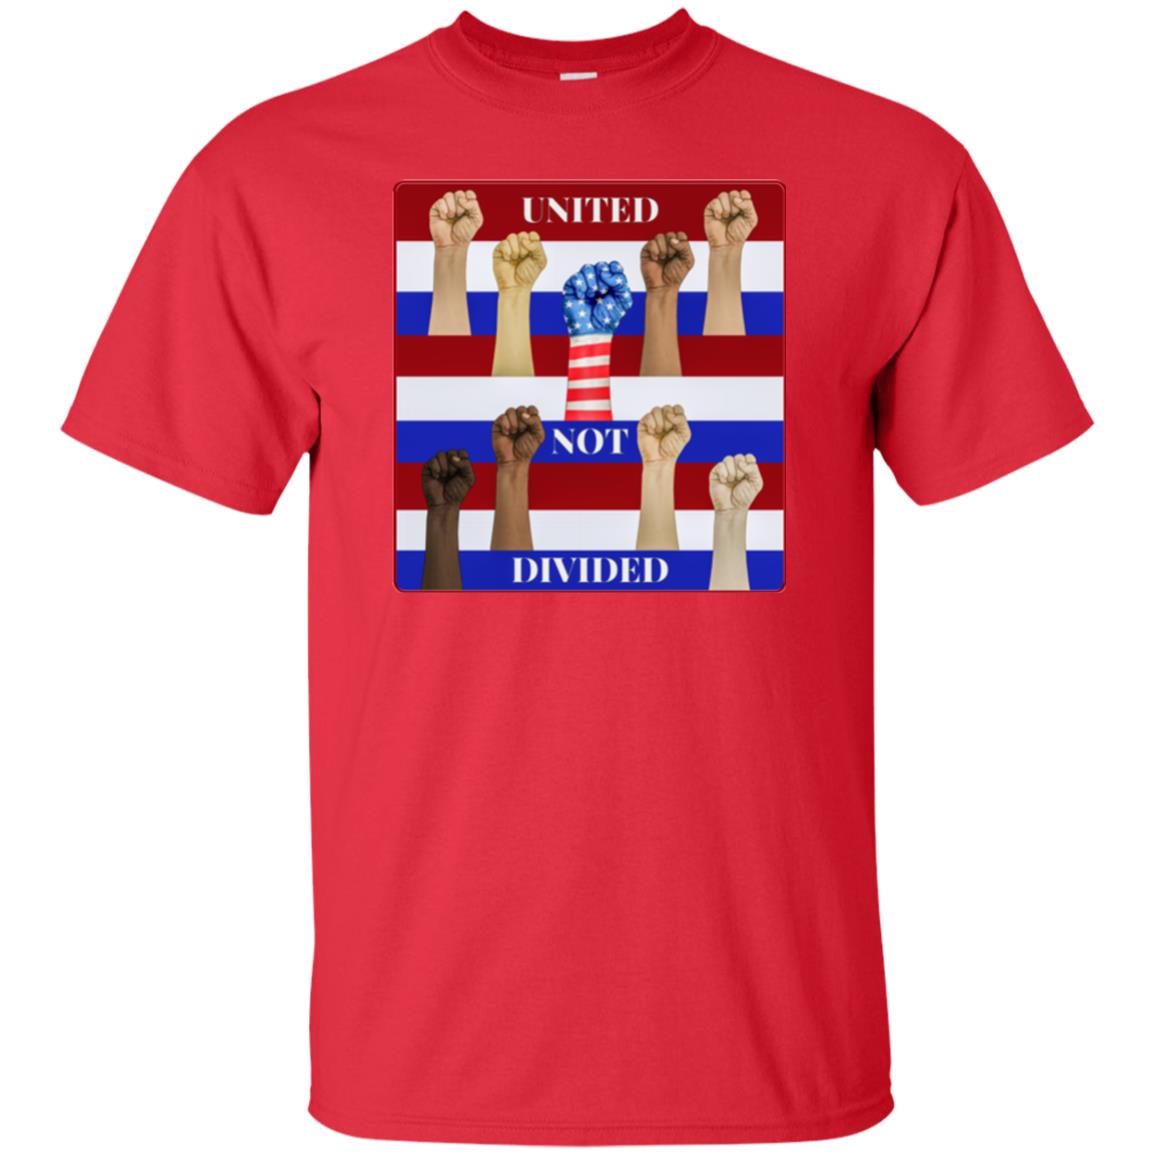 united not divided - Men's Classic Fit T-Shirt